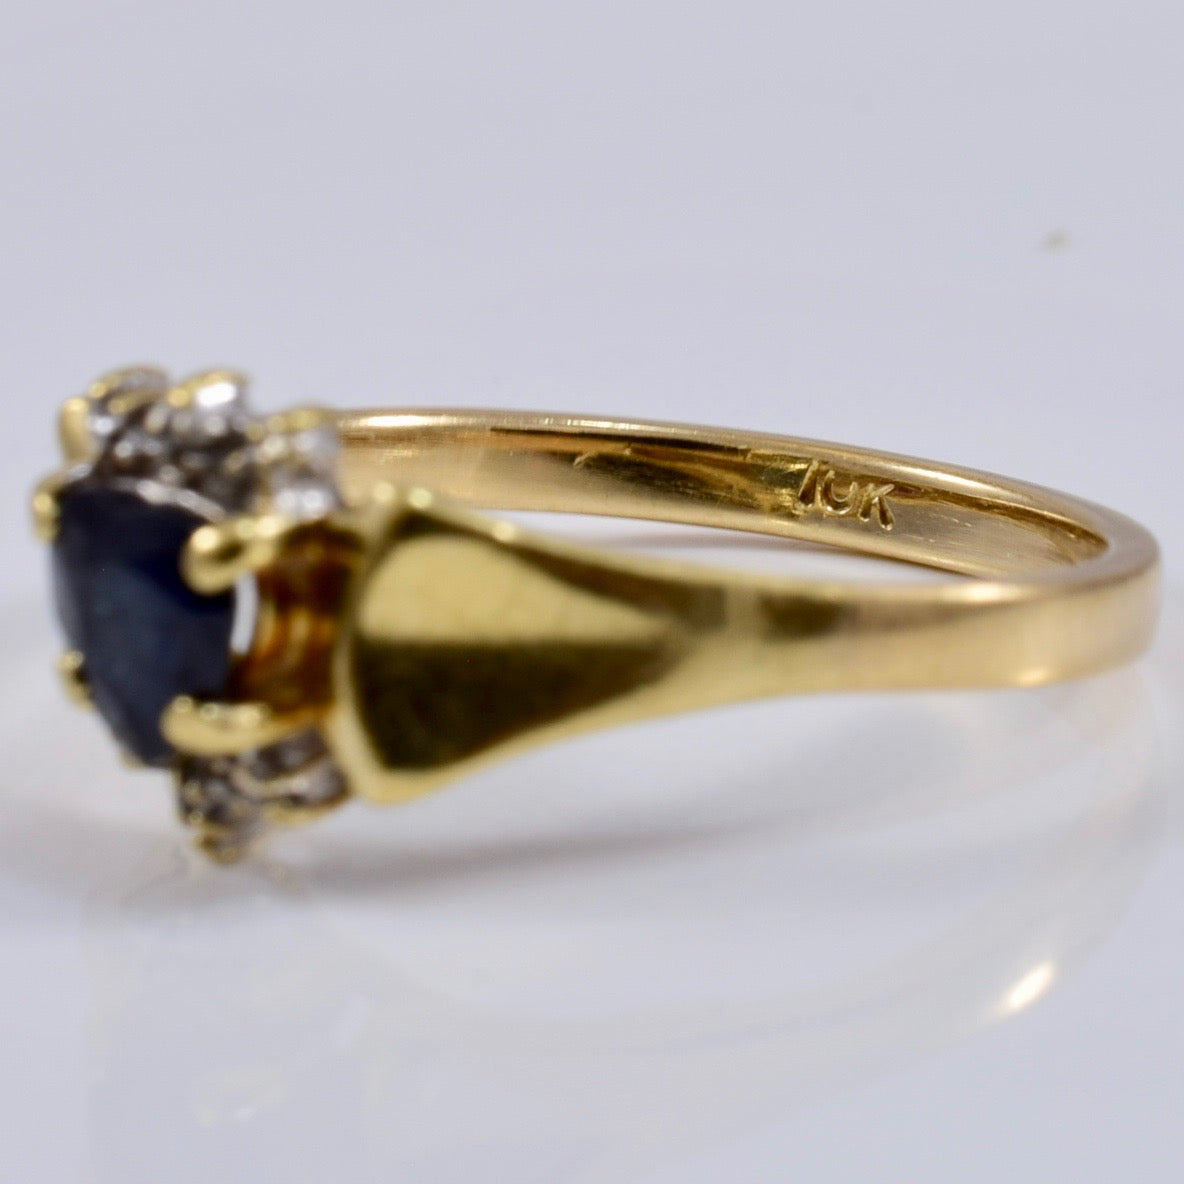 Heart Cut Sapphire Ring with Diamond Accents | 0.01 ctw SZ 6.75 |